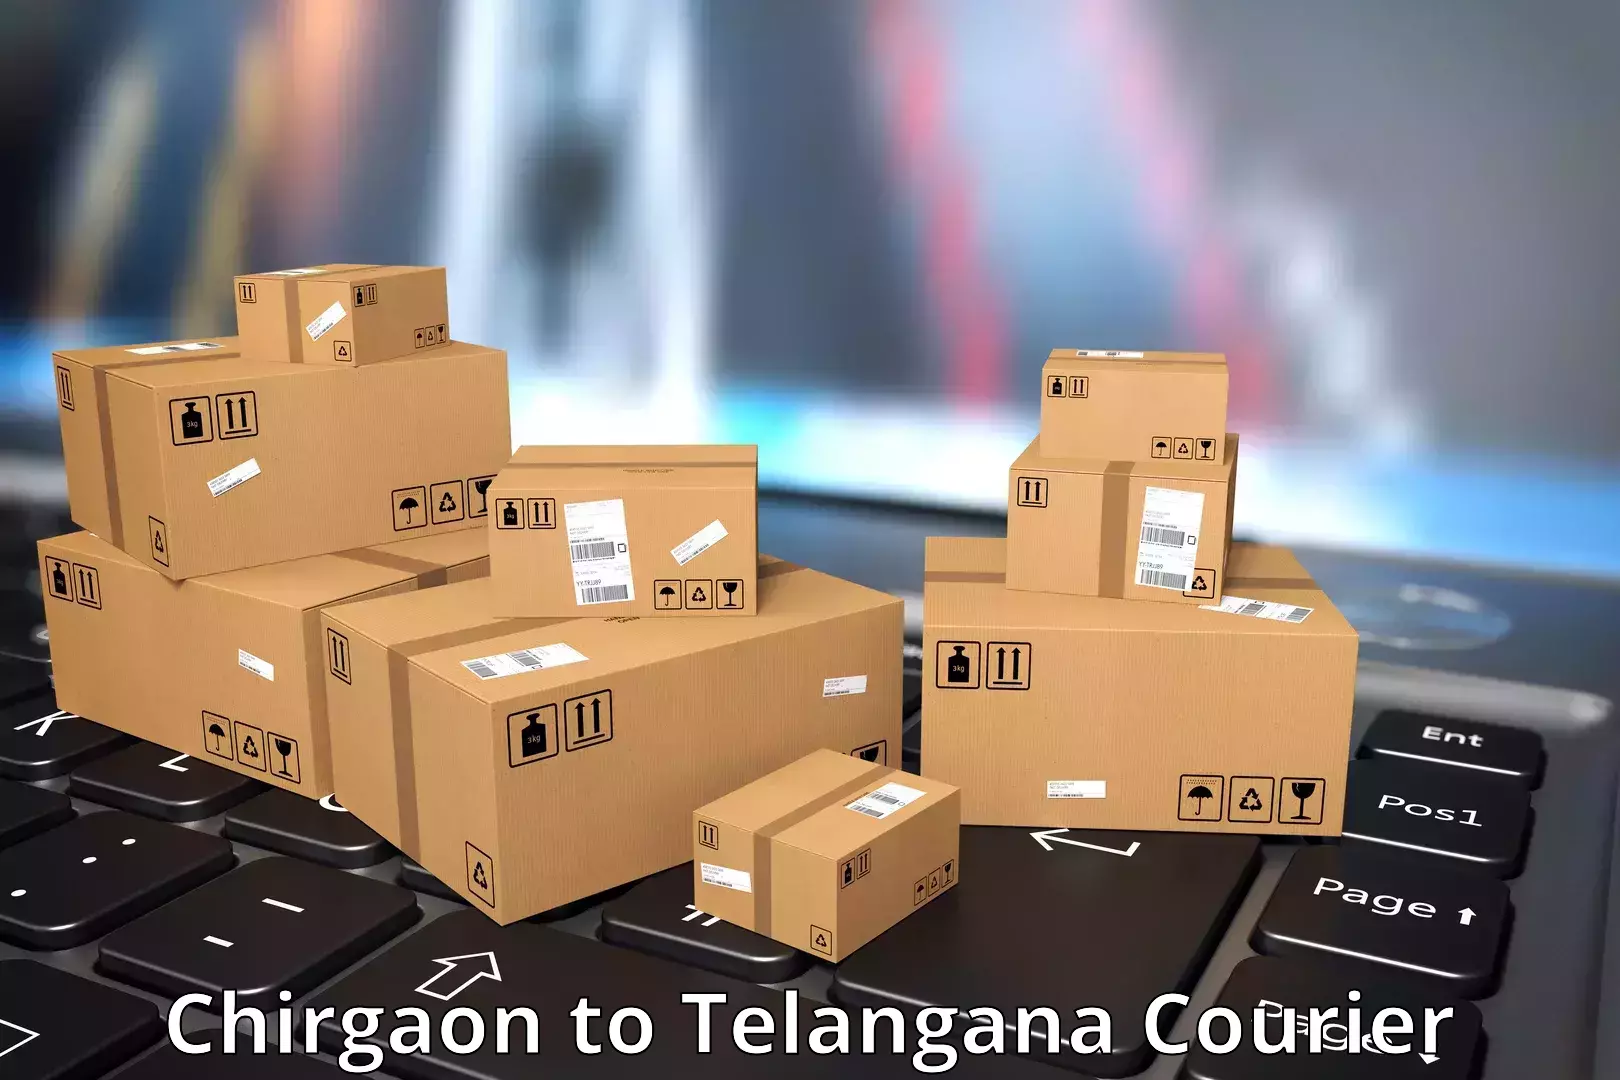 Scalable shipping solutions Chirgaon to Hyderabad